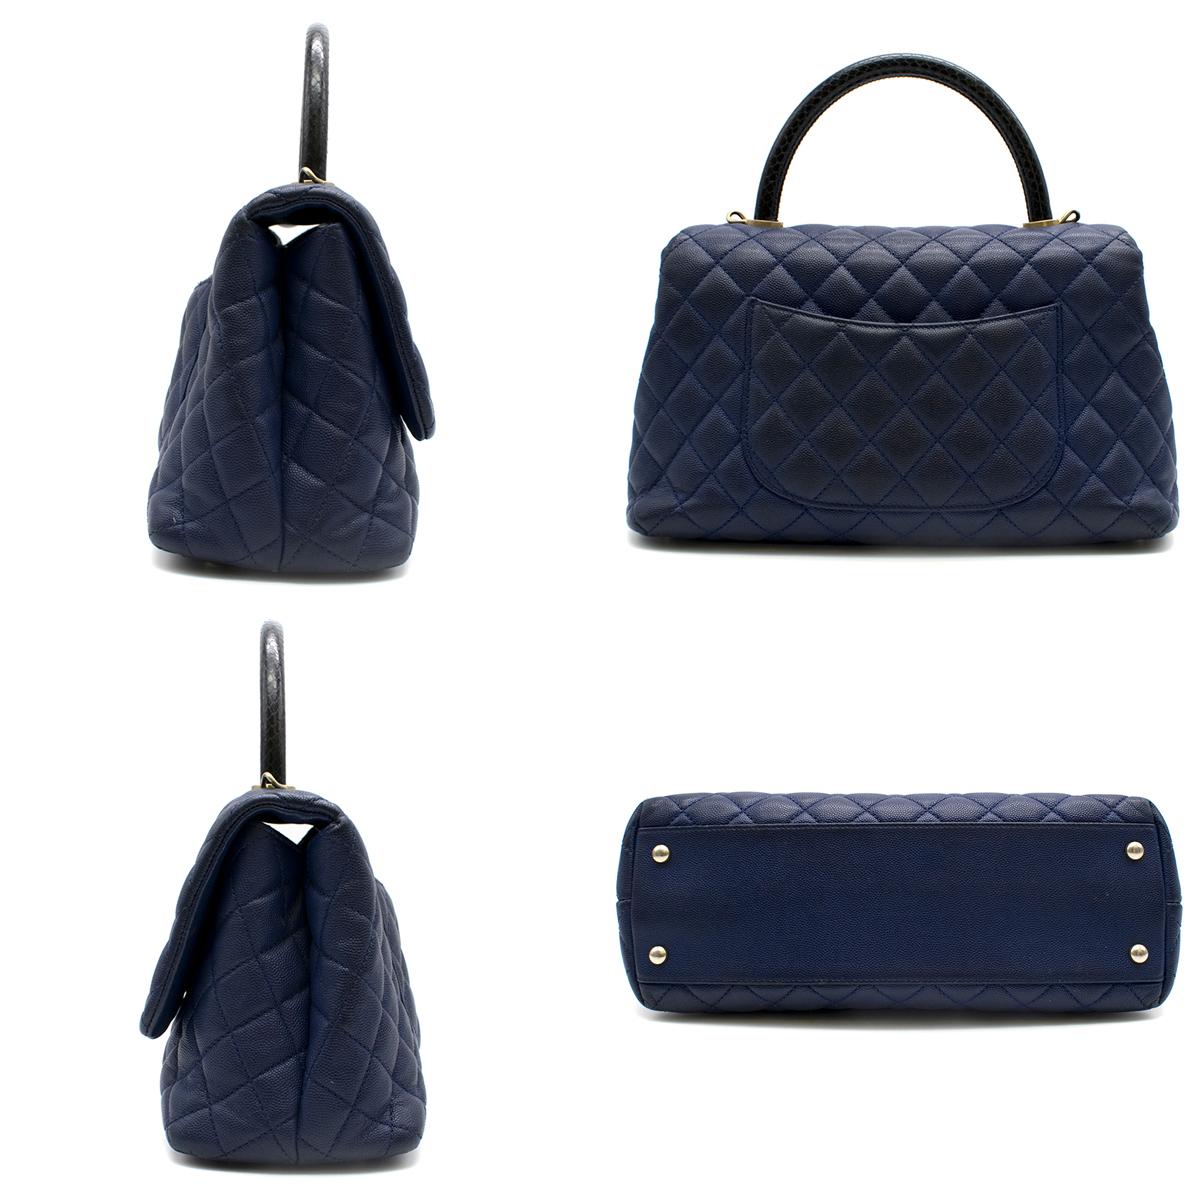 Chanel Navy Caviar Leather Lizard Embossed Top Handle Flap Bag

Navy blue bag
Black Lizard handle 
Quilted caviar leather
Rear slip in pocket. 
Polished CC turn lock closure Leather lined interior  
Two zipper pockets in interior.

Please note,